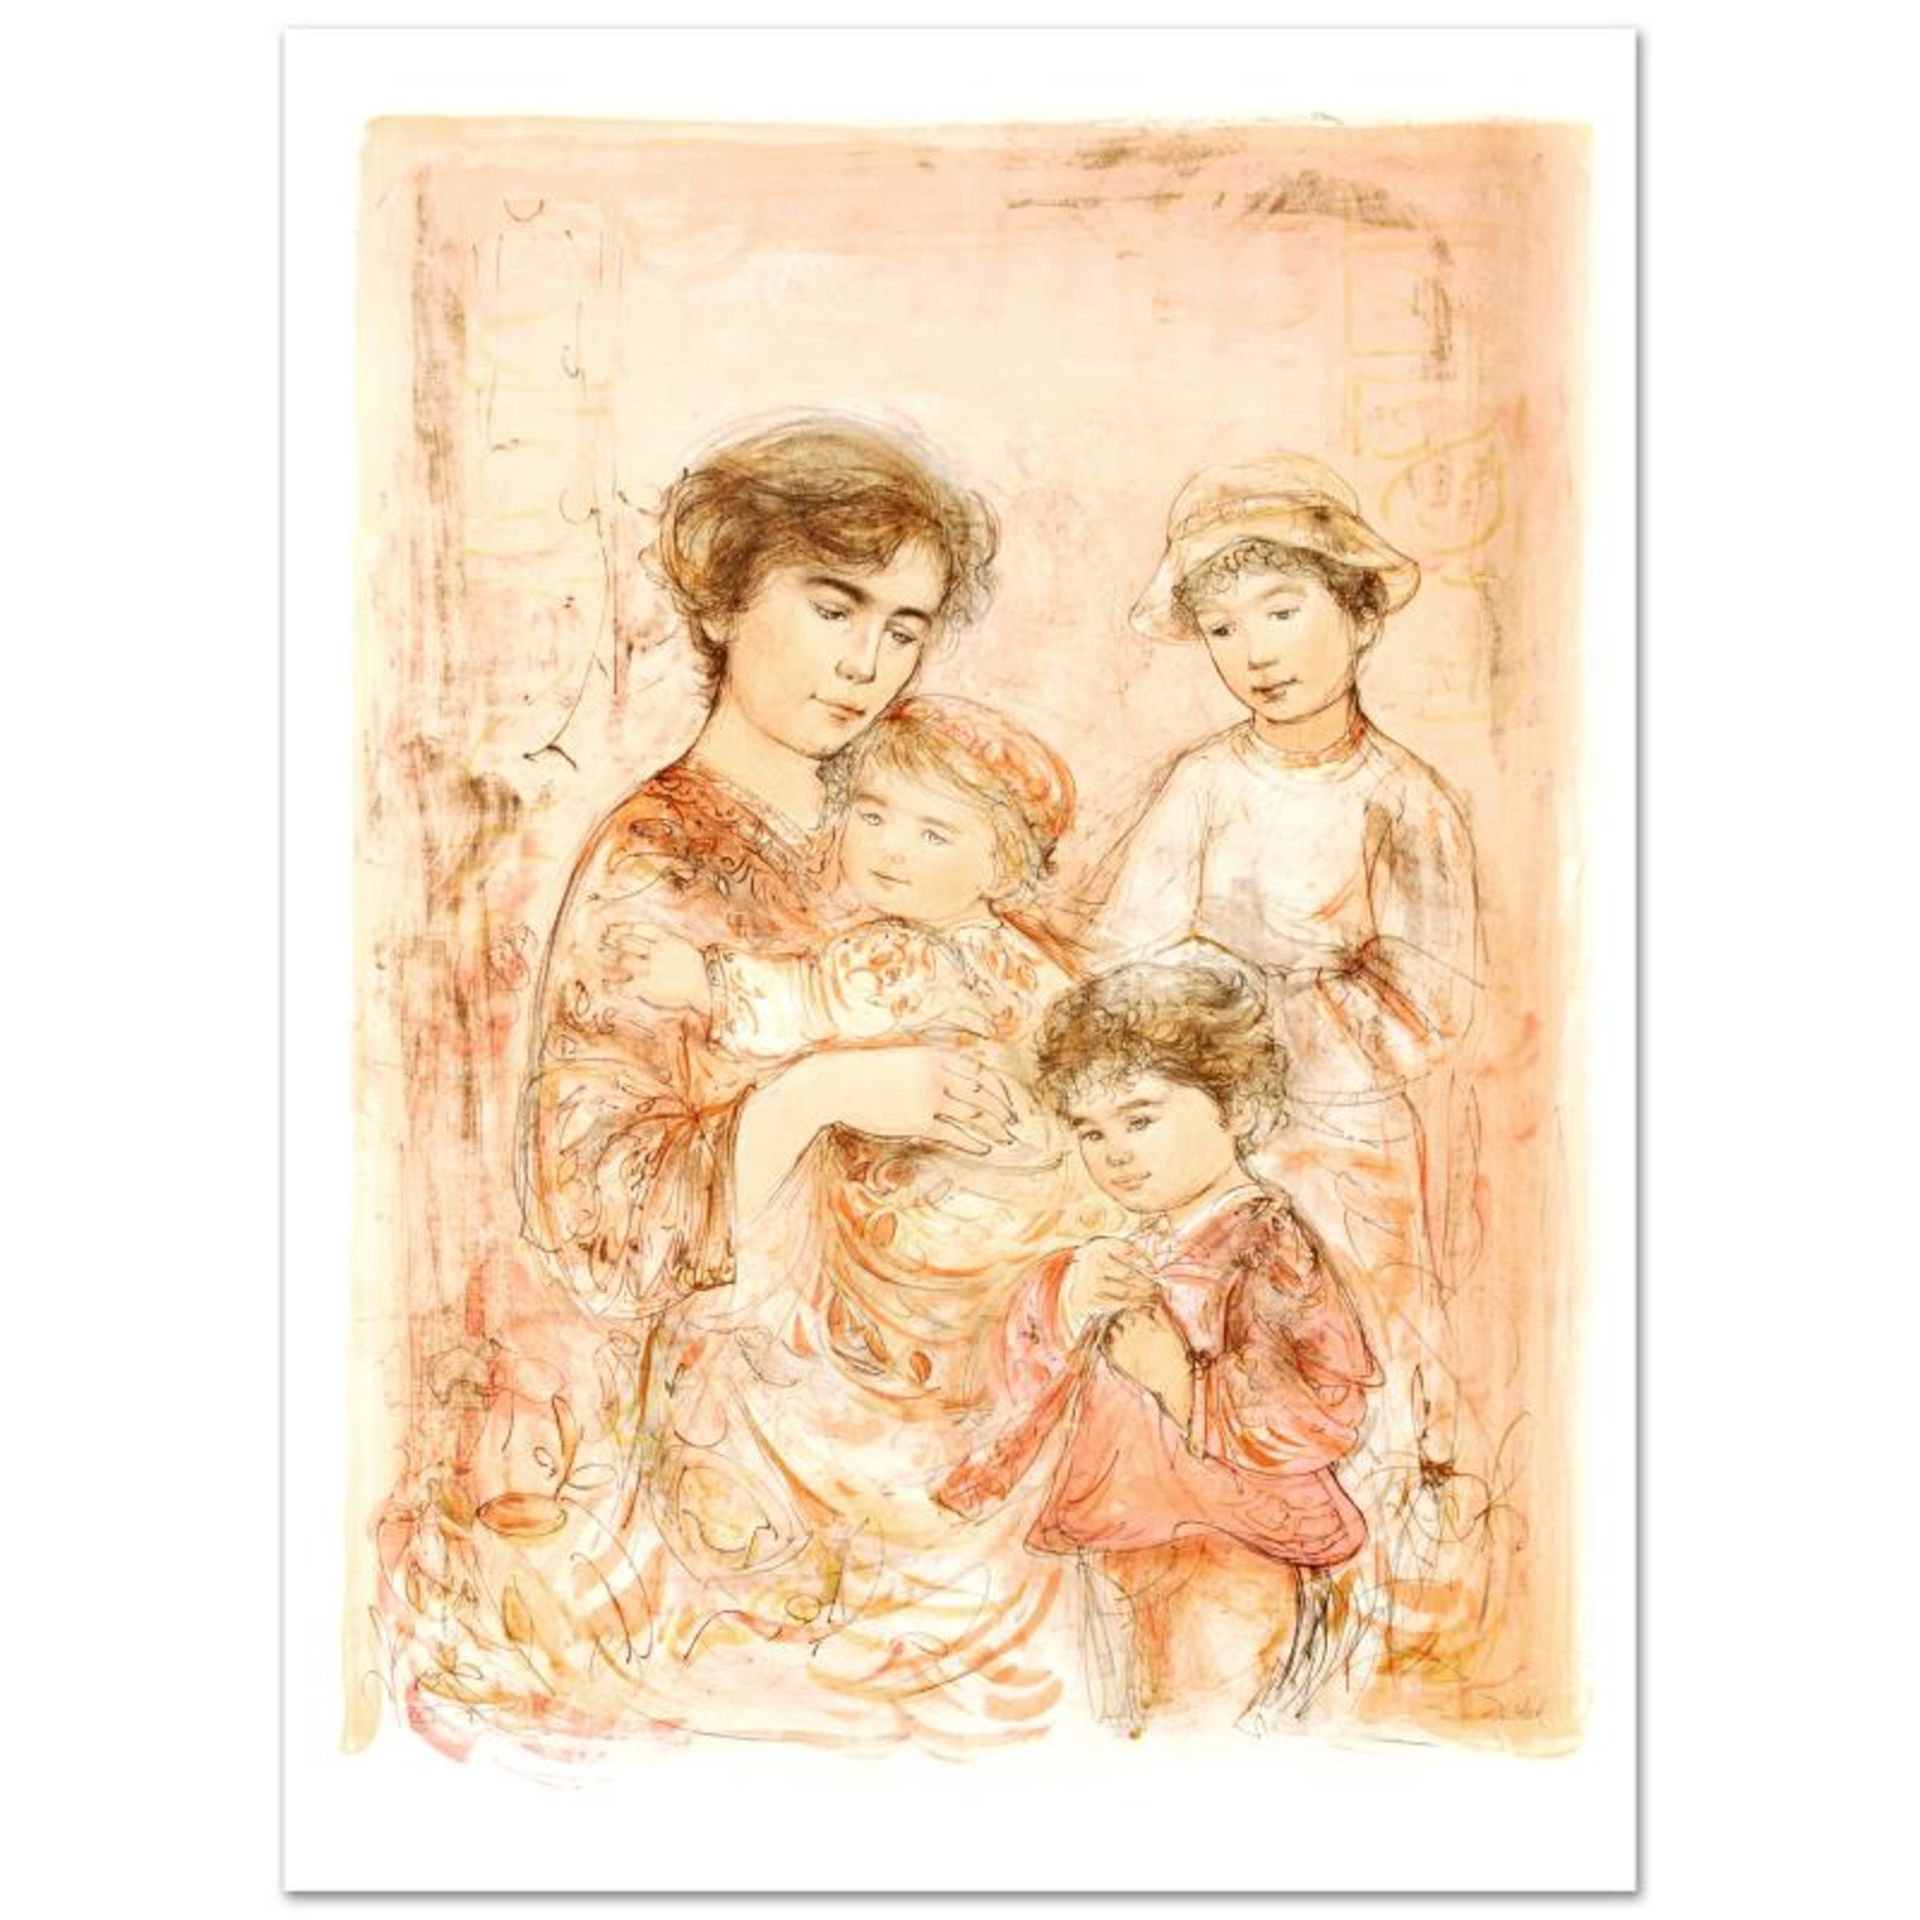 "Lotte and Her Children" Limited Edition Lithograph (27" x 37.5") by Edna Hibel